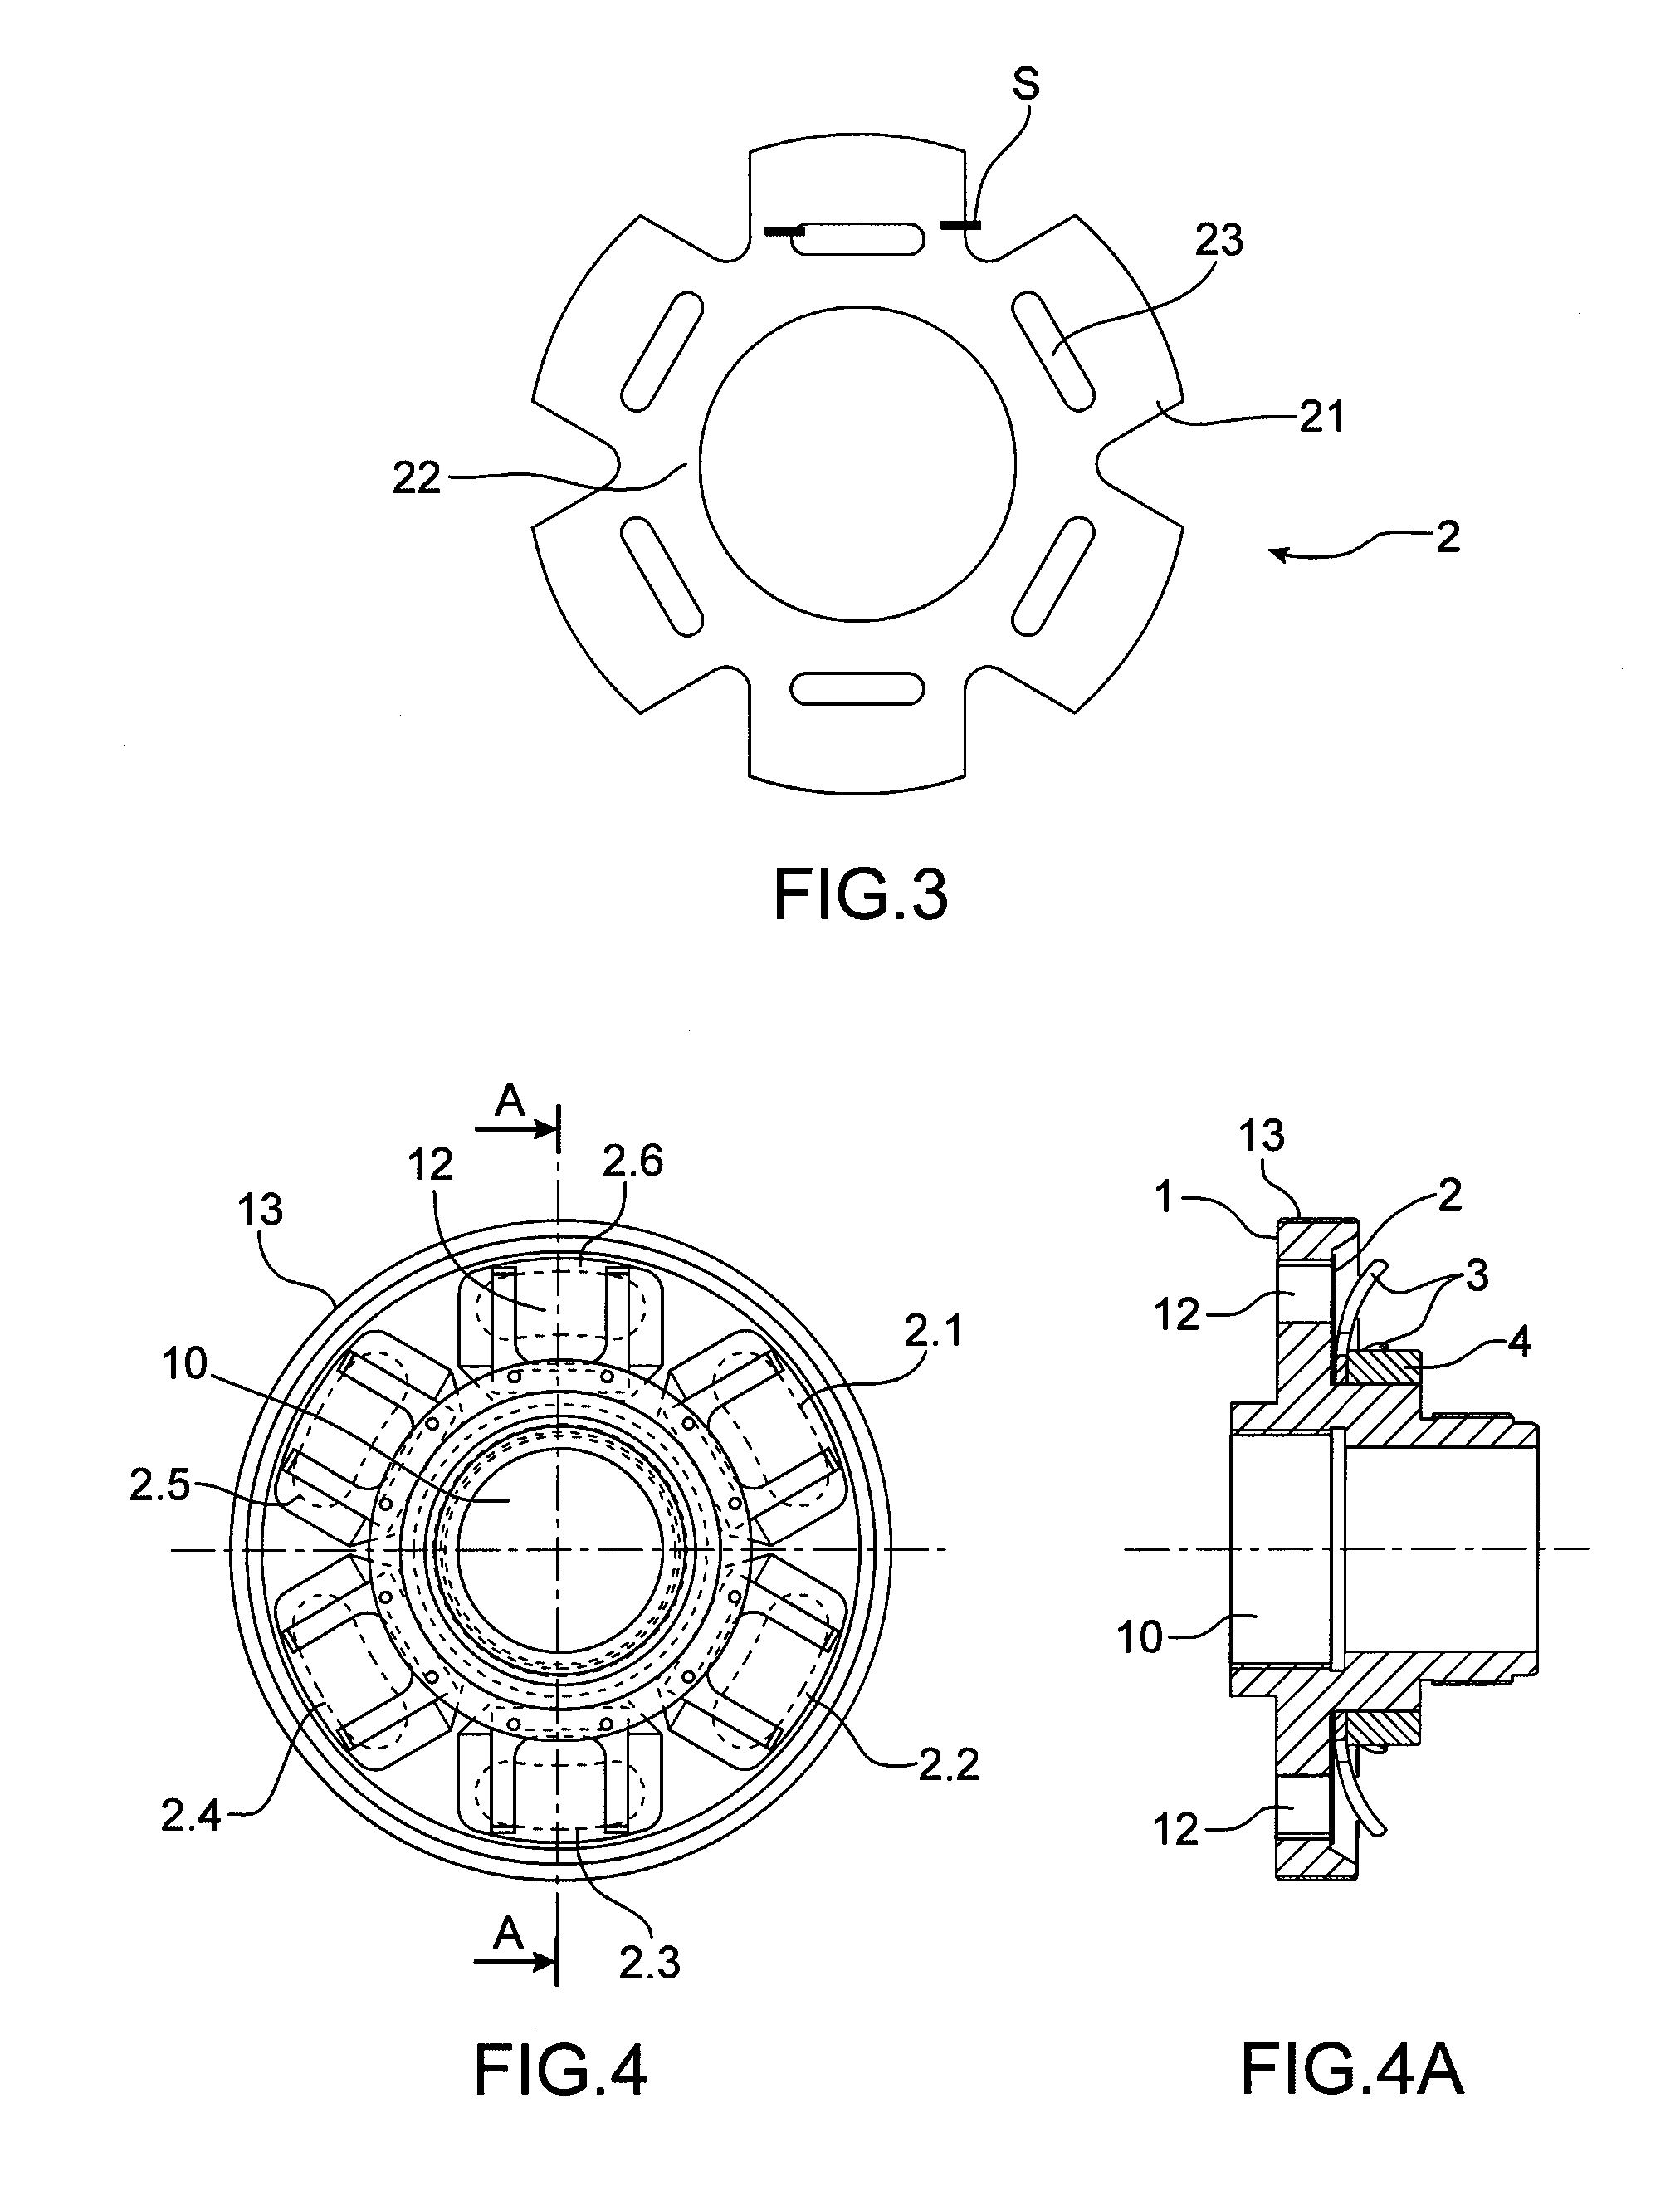 Relief valve for discharging a dielectric gas between two volumes of a high-voltage or medium-voltage interrupting chamber